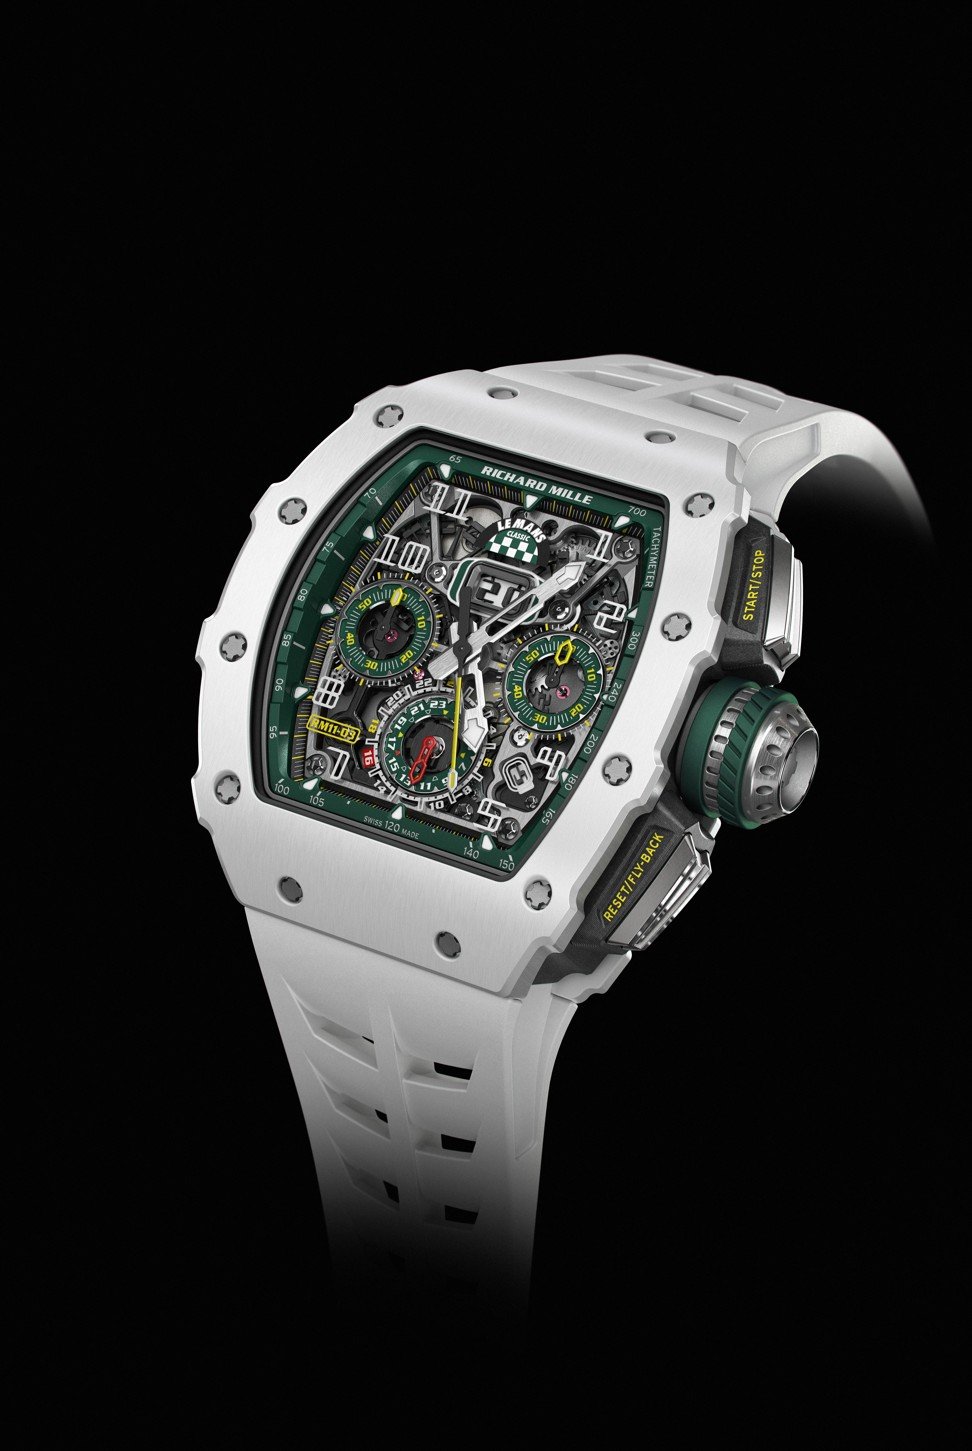 RM11-03 LMC stands out with its white ceramic and traditional British racing green body.